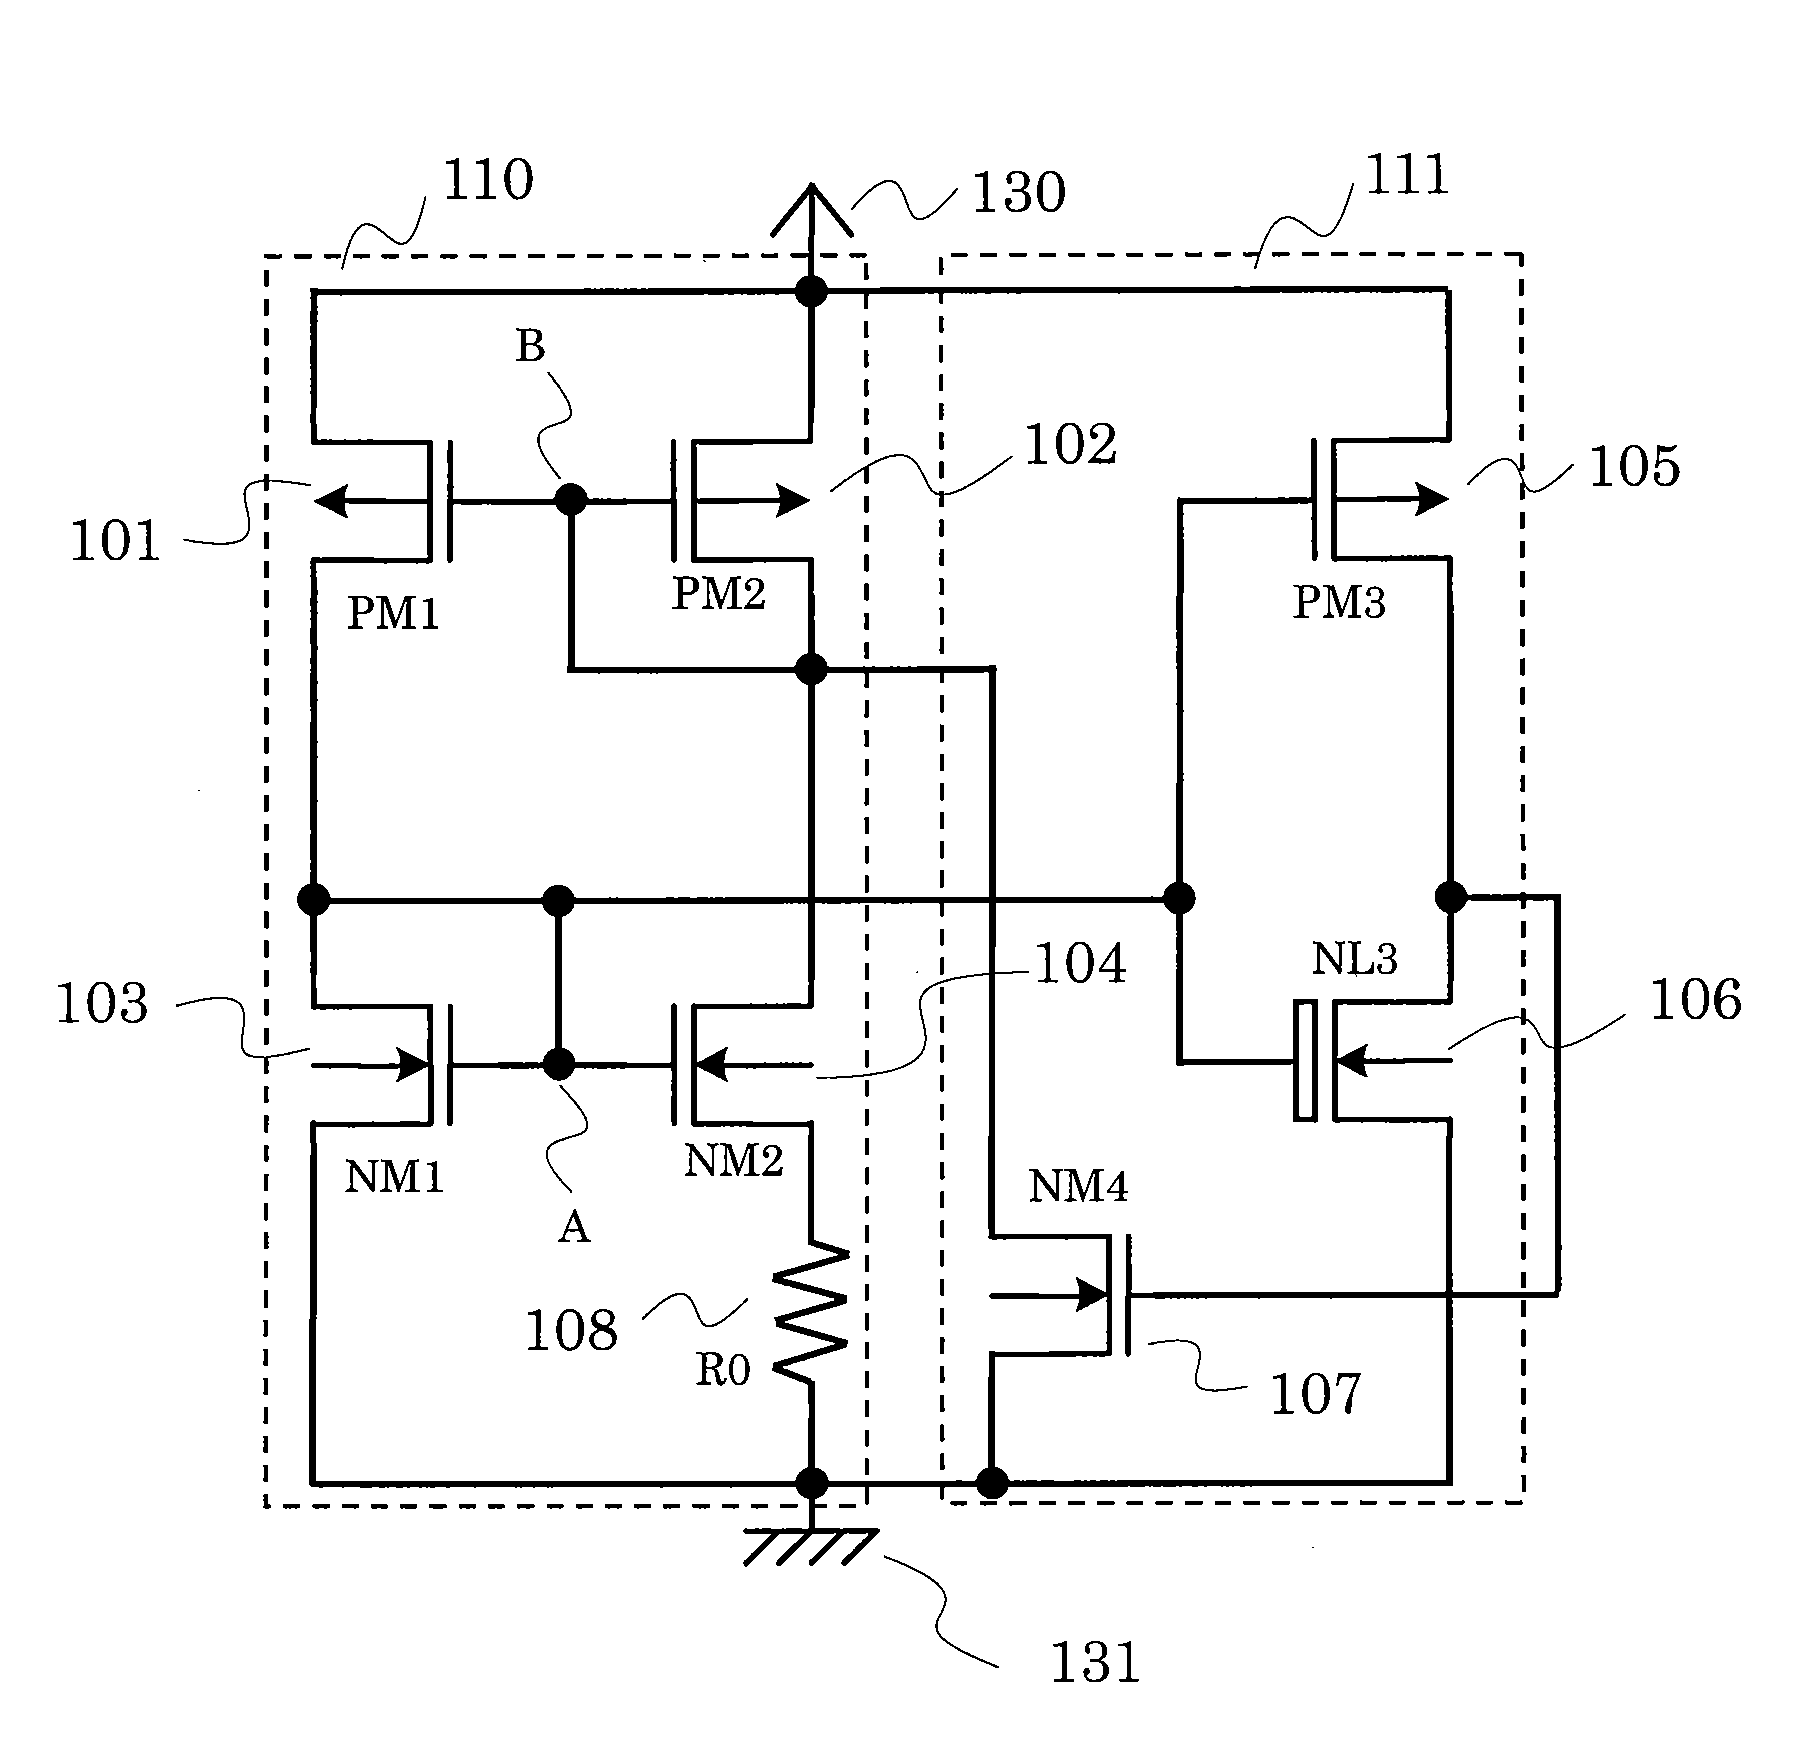 Constant current circuit start-up circuitry for preventing power input oscillation